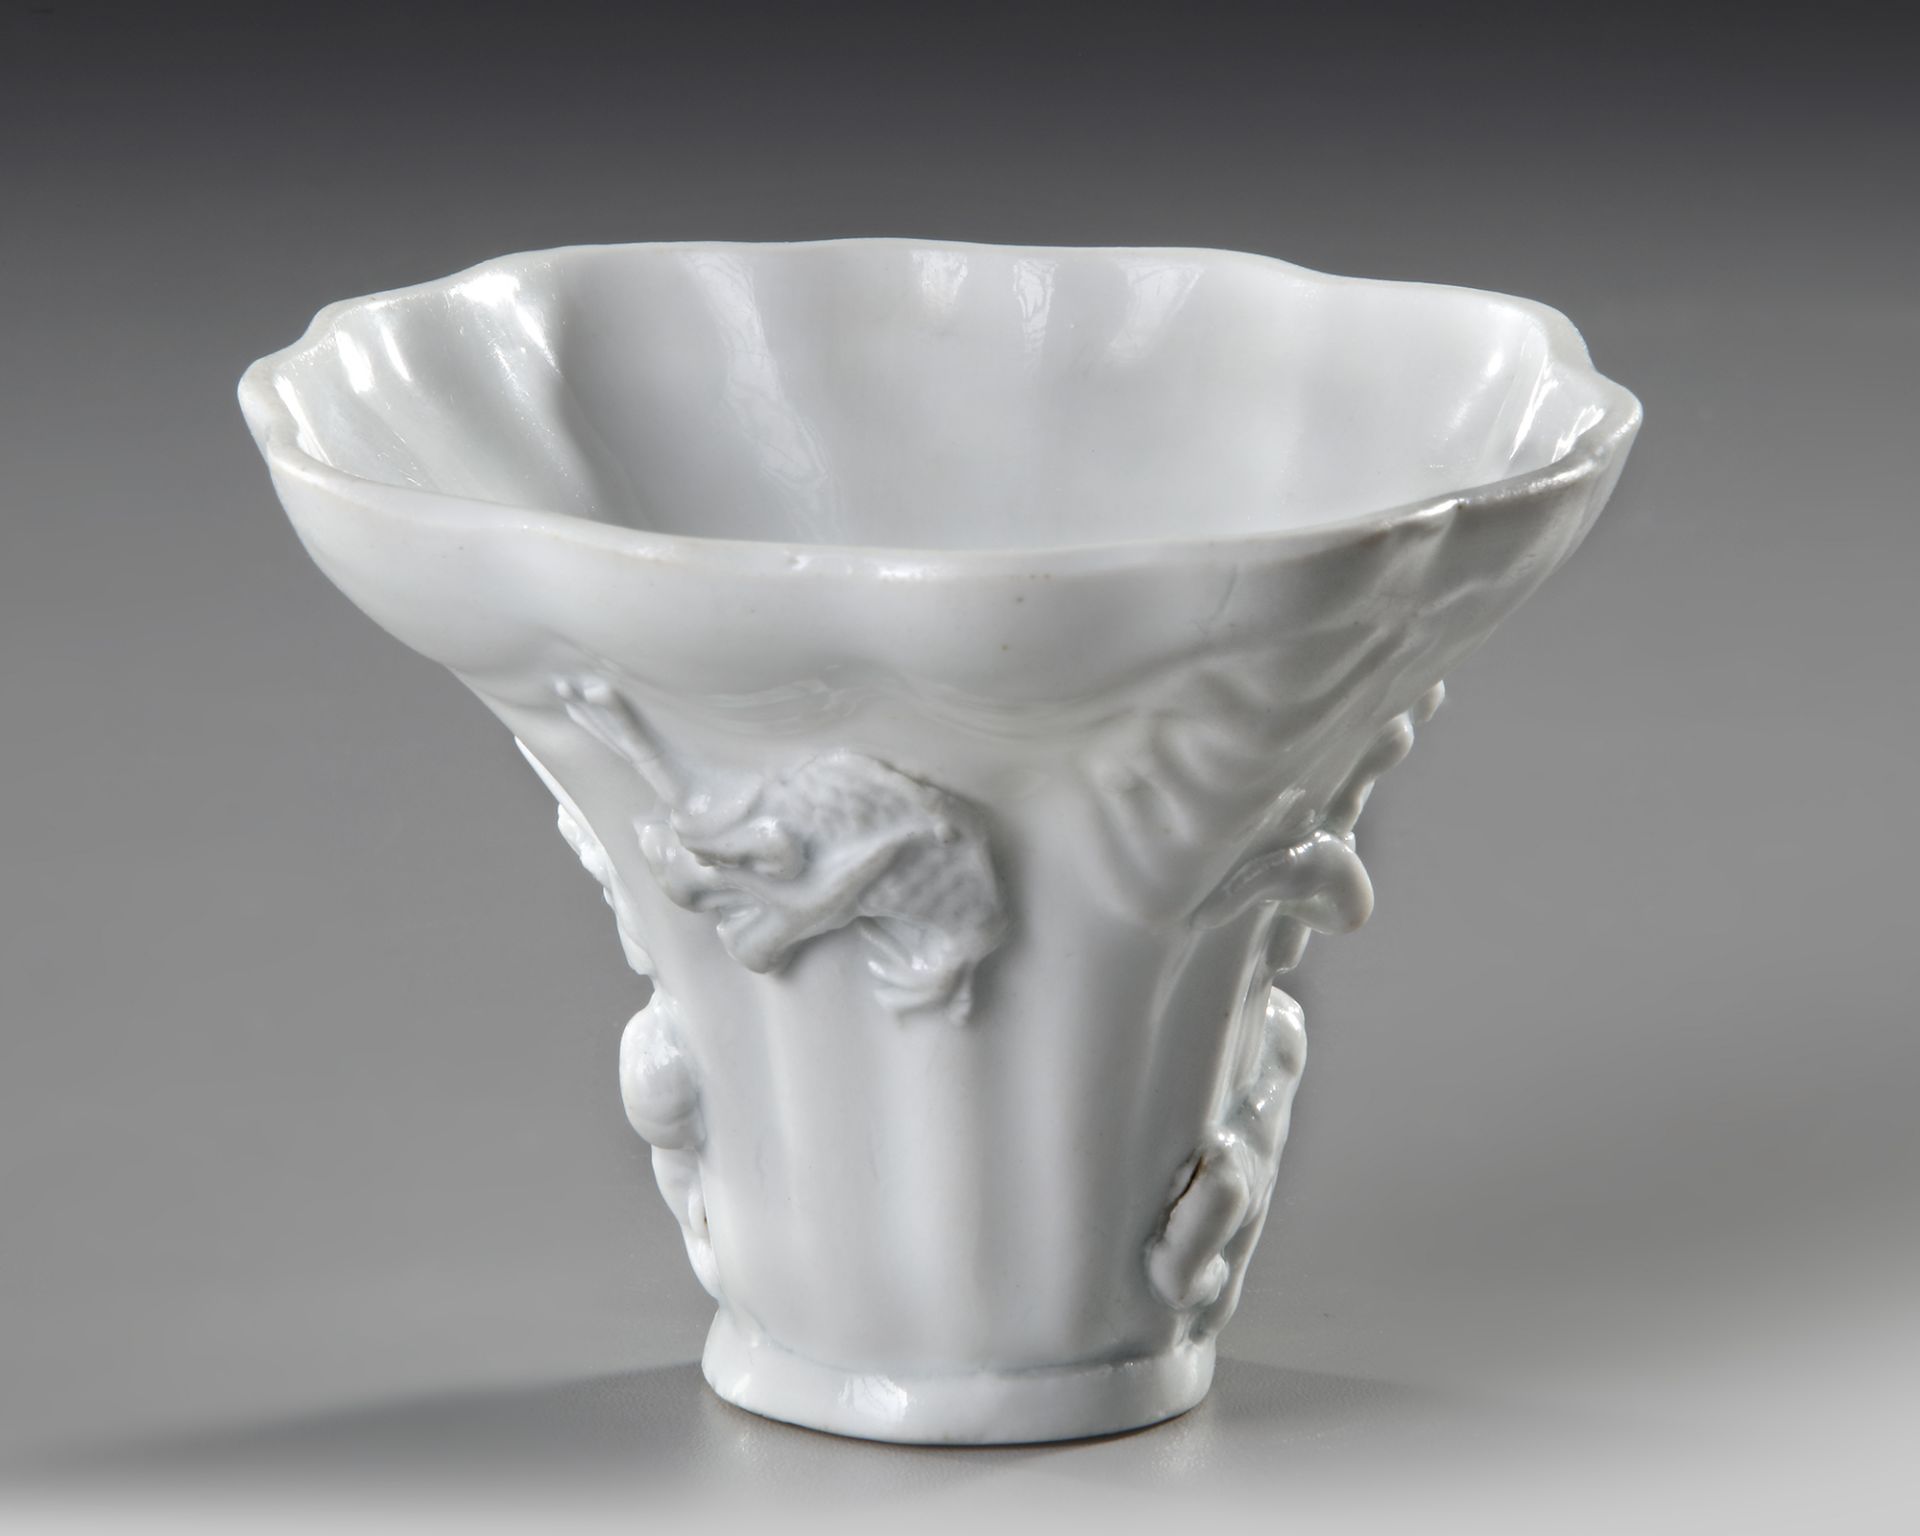 A CHINESE BLANC DE CHINE LIBATION CUP, 18TH CENTURY - Image 3 of 5